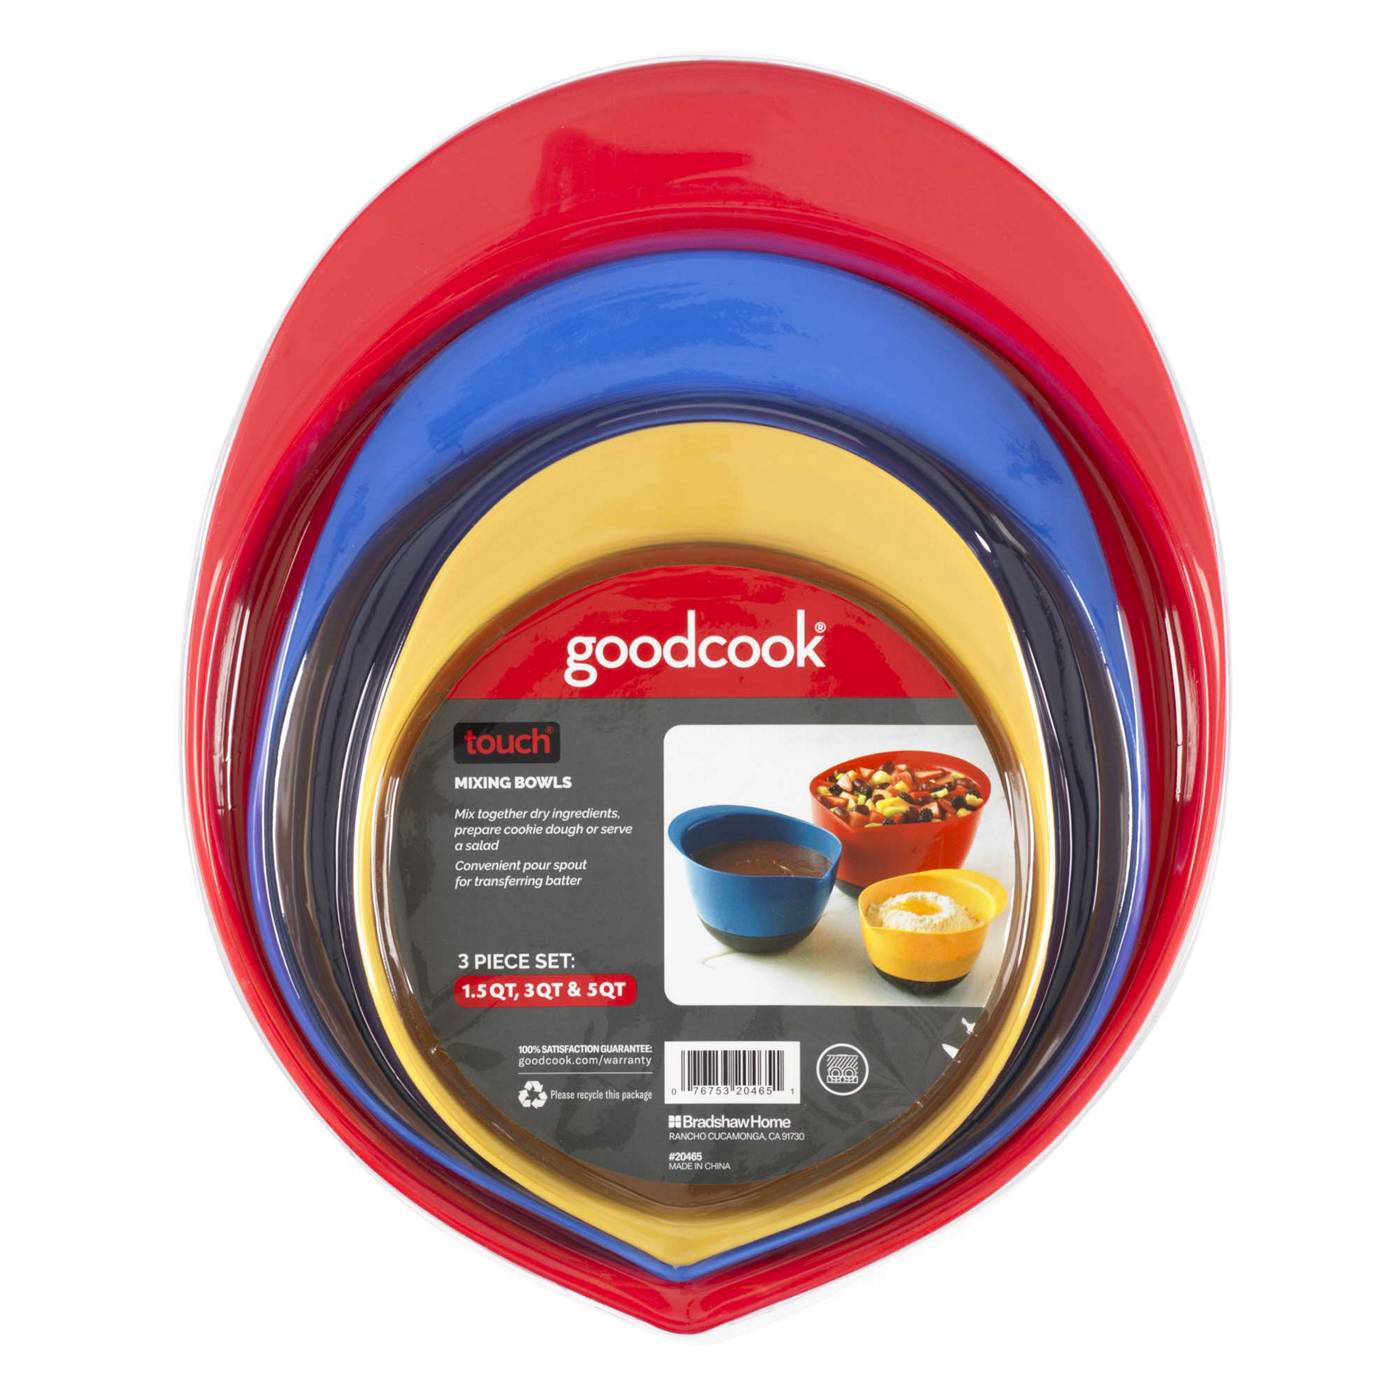 GoodCook Touch Mixing Bowl Set; image 1 of 5